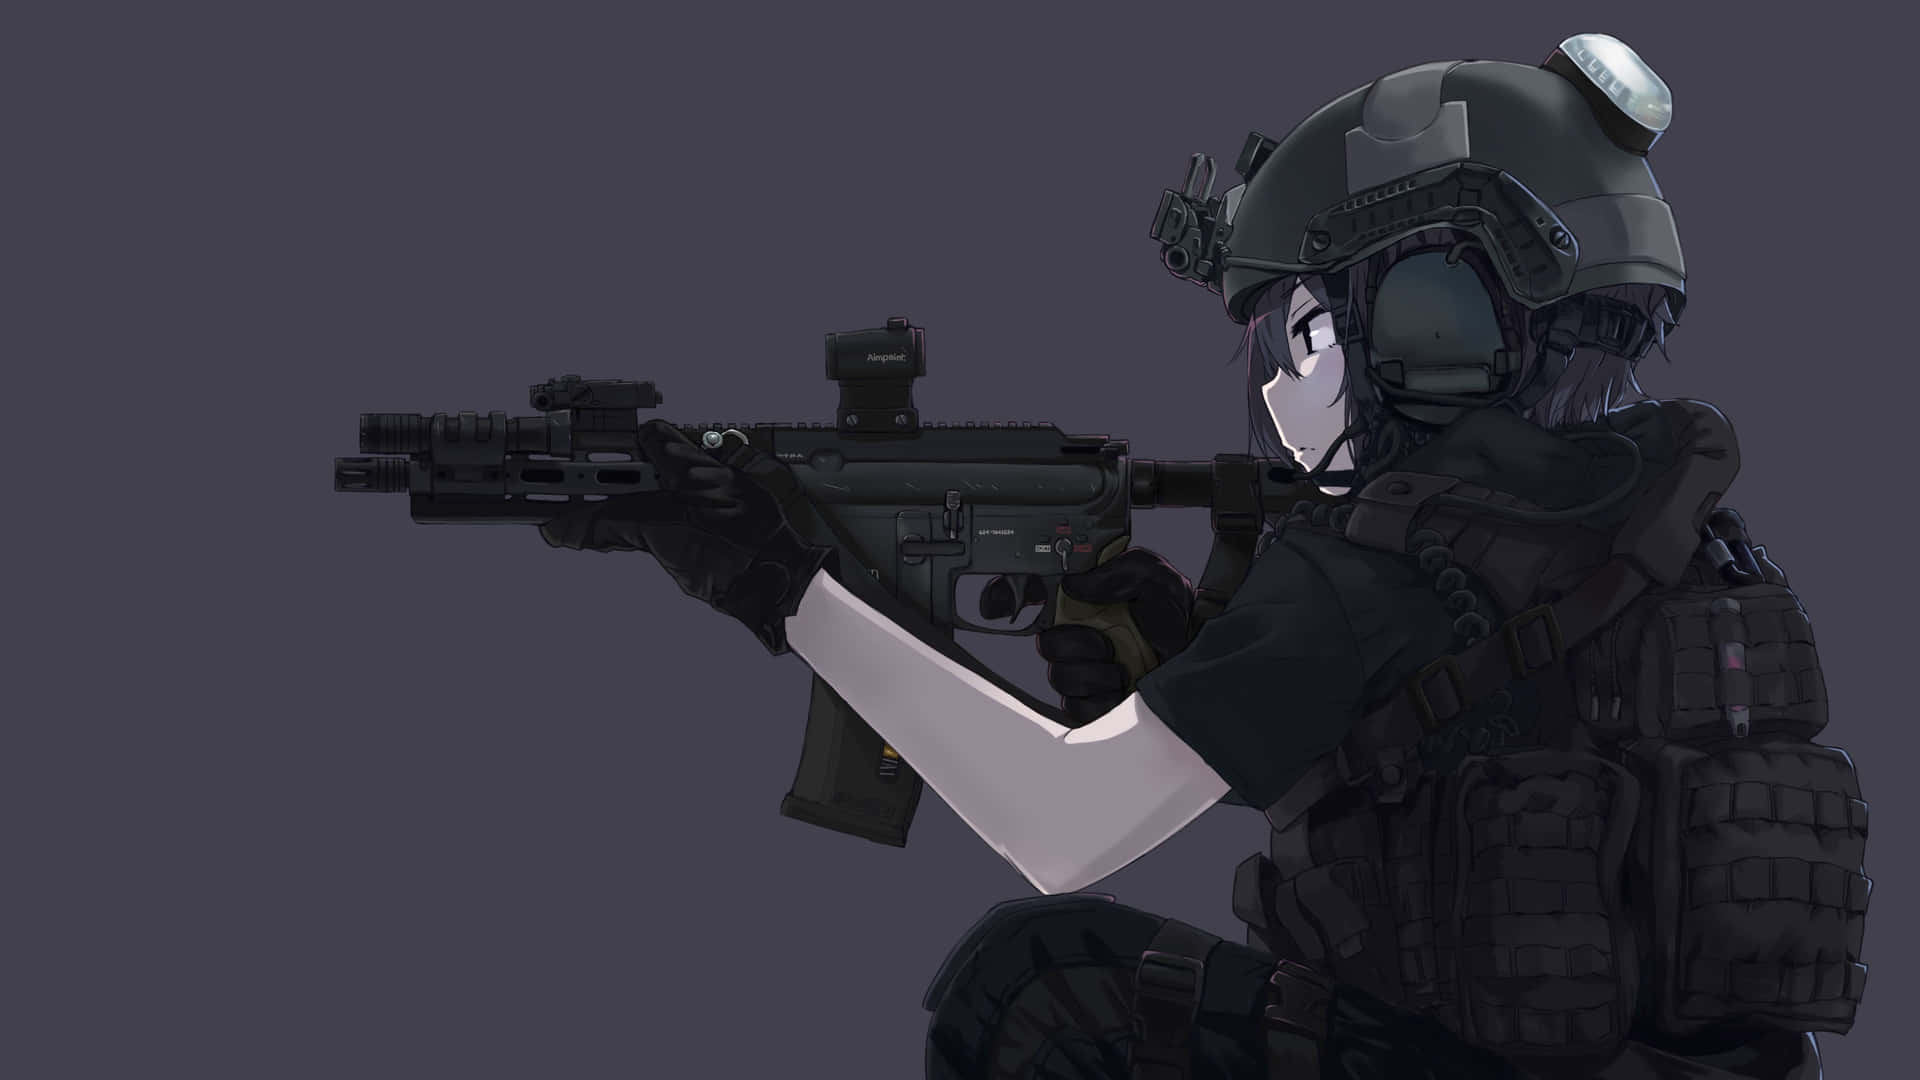 Ready to Conquer with Tactical Gear Wallpaper